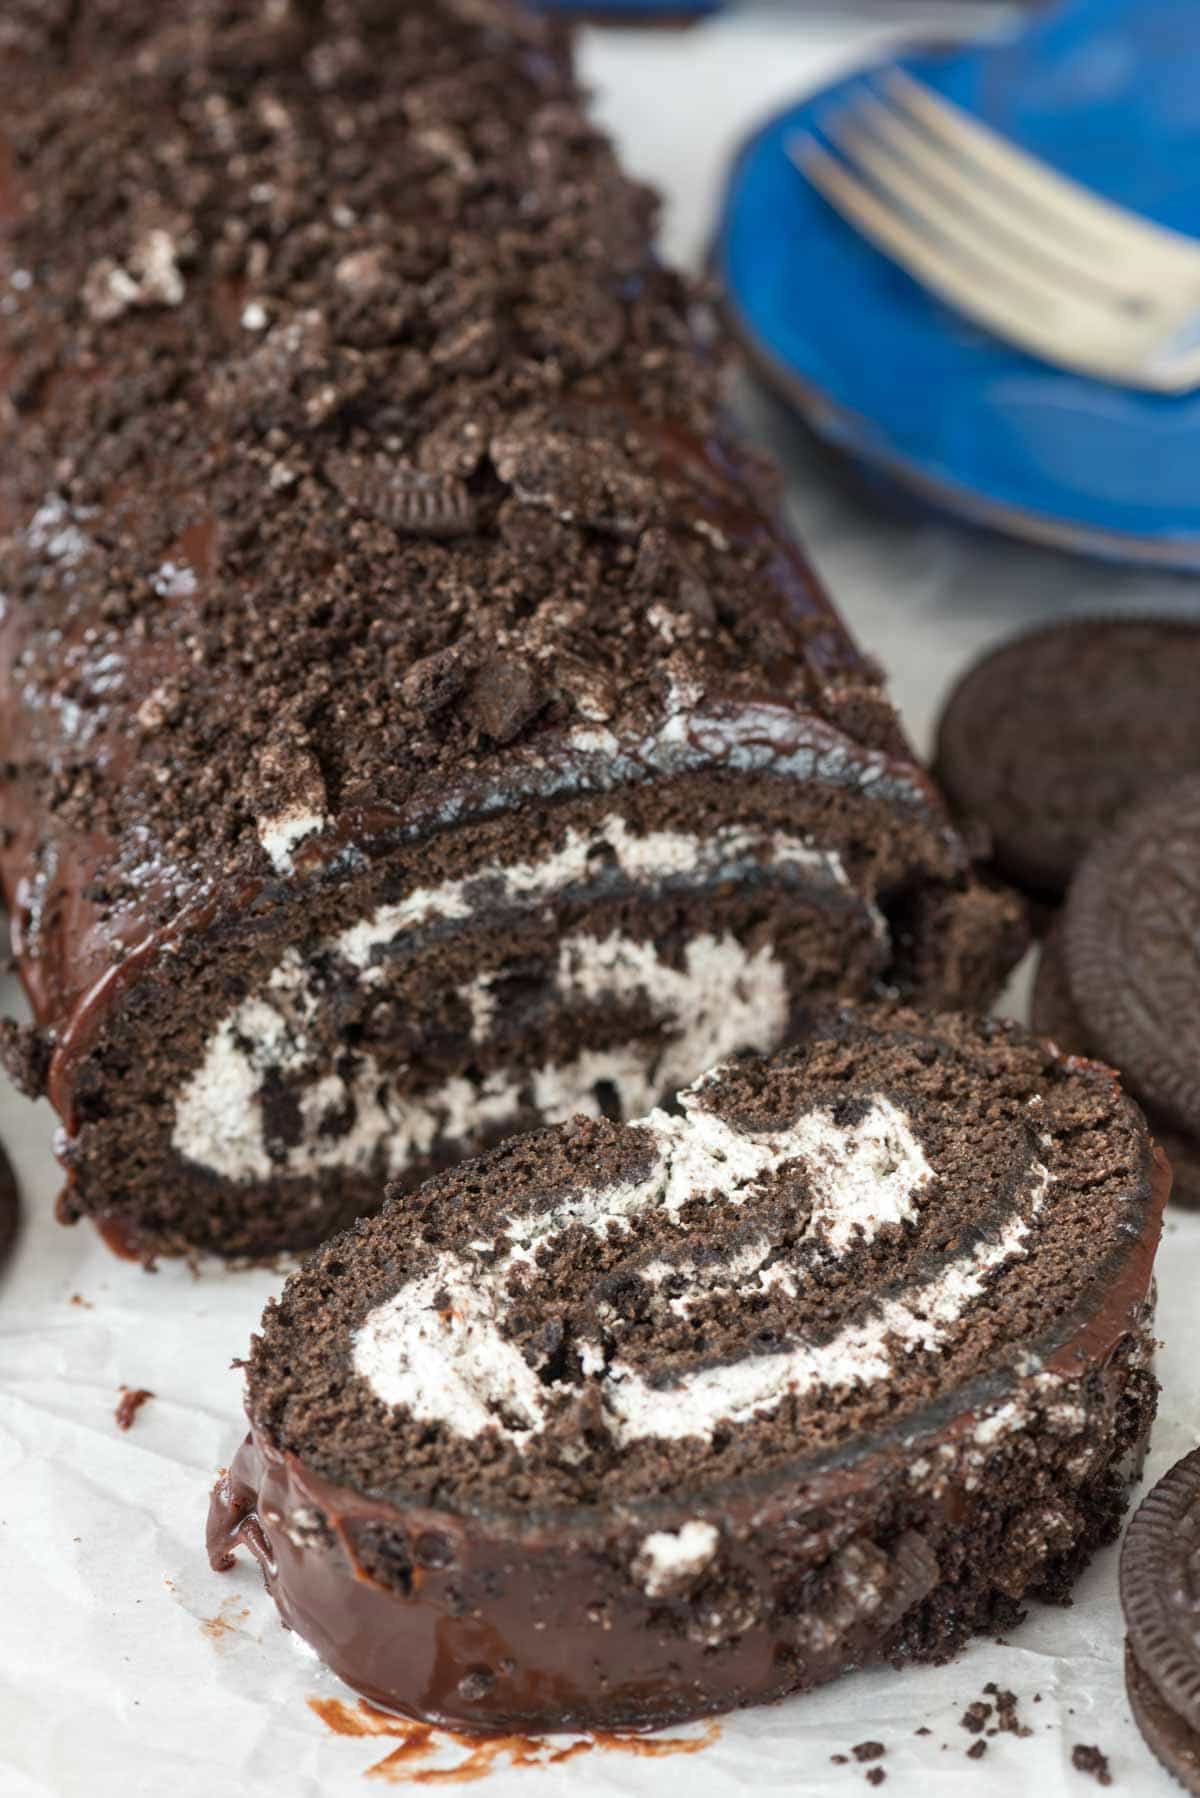 sliced Oreo cake roll thats rolled with white frosting and topped with crumbled Oreos.